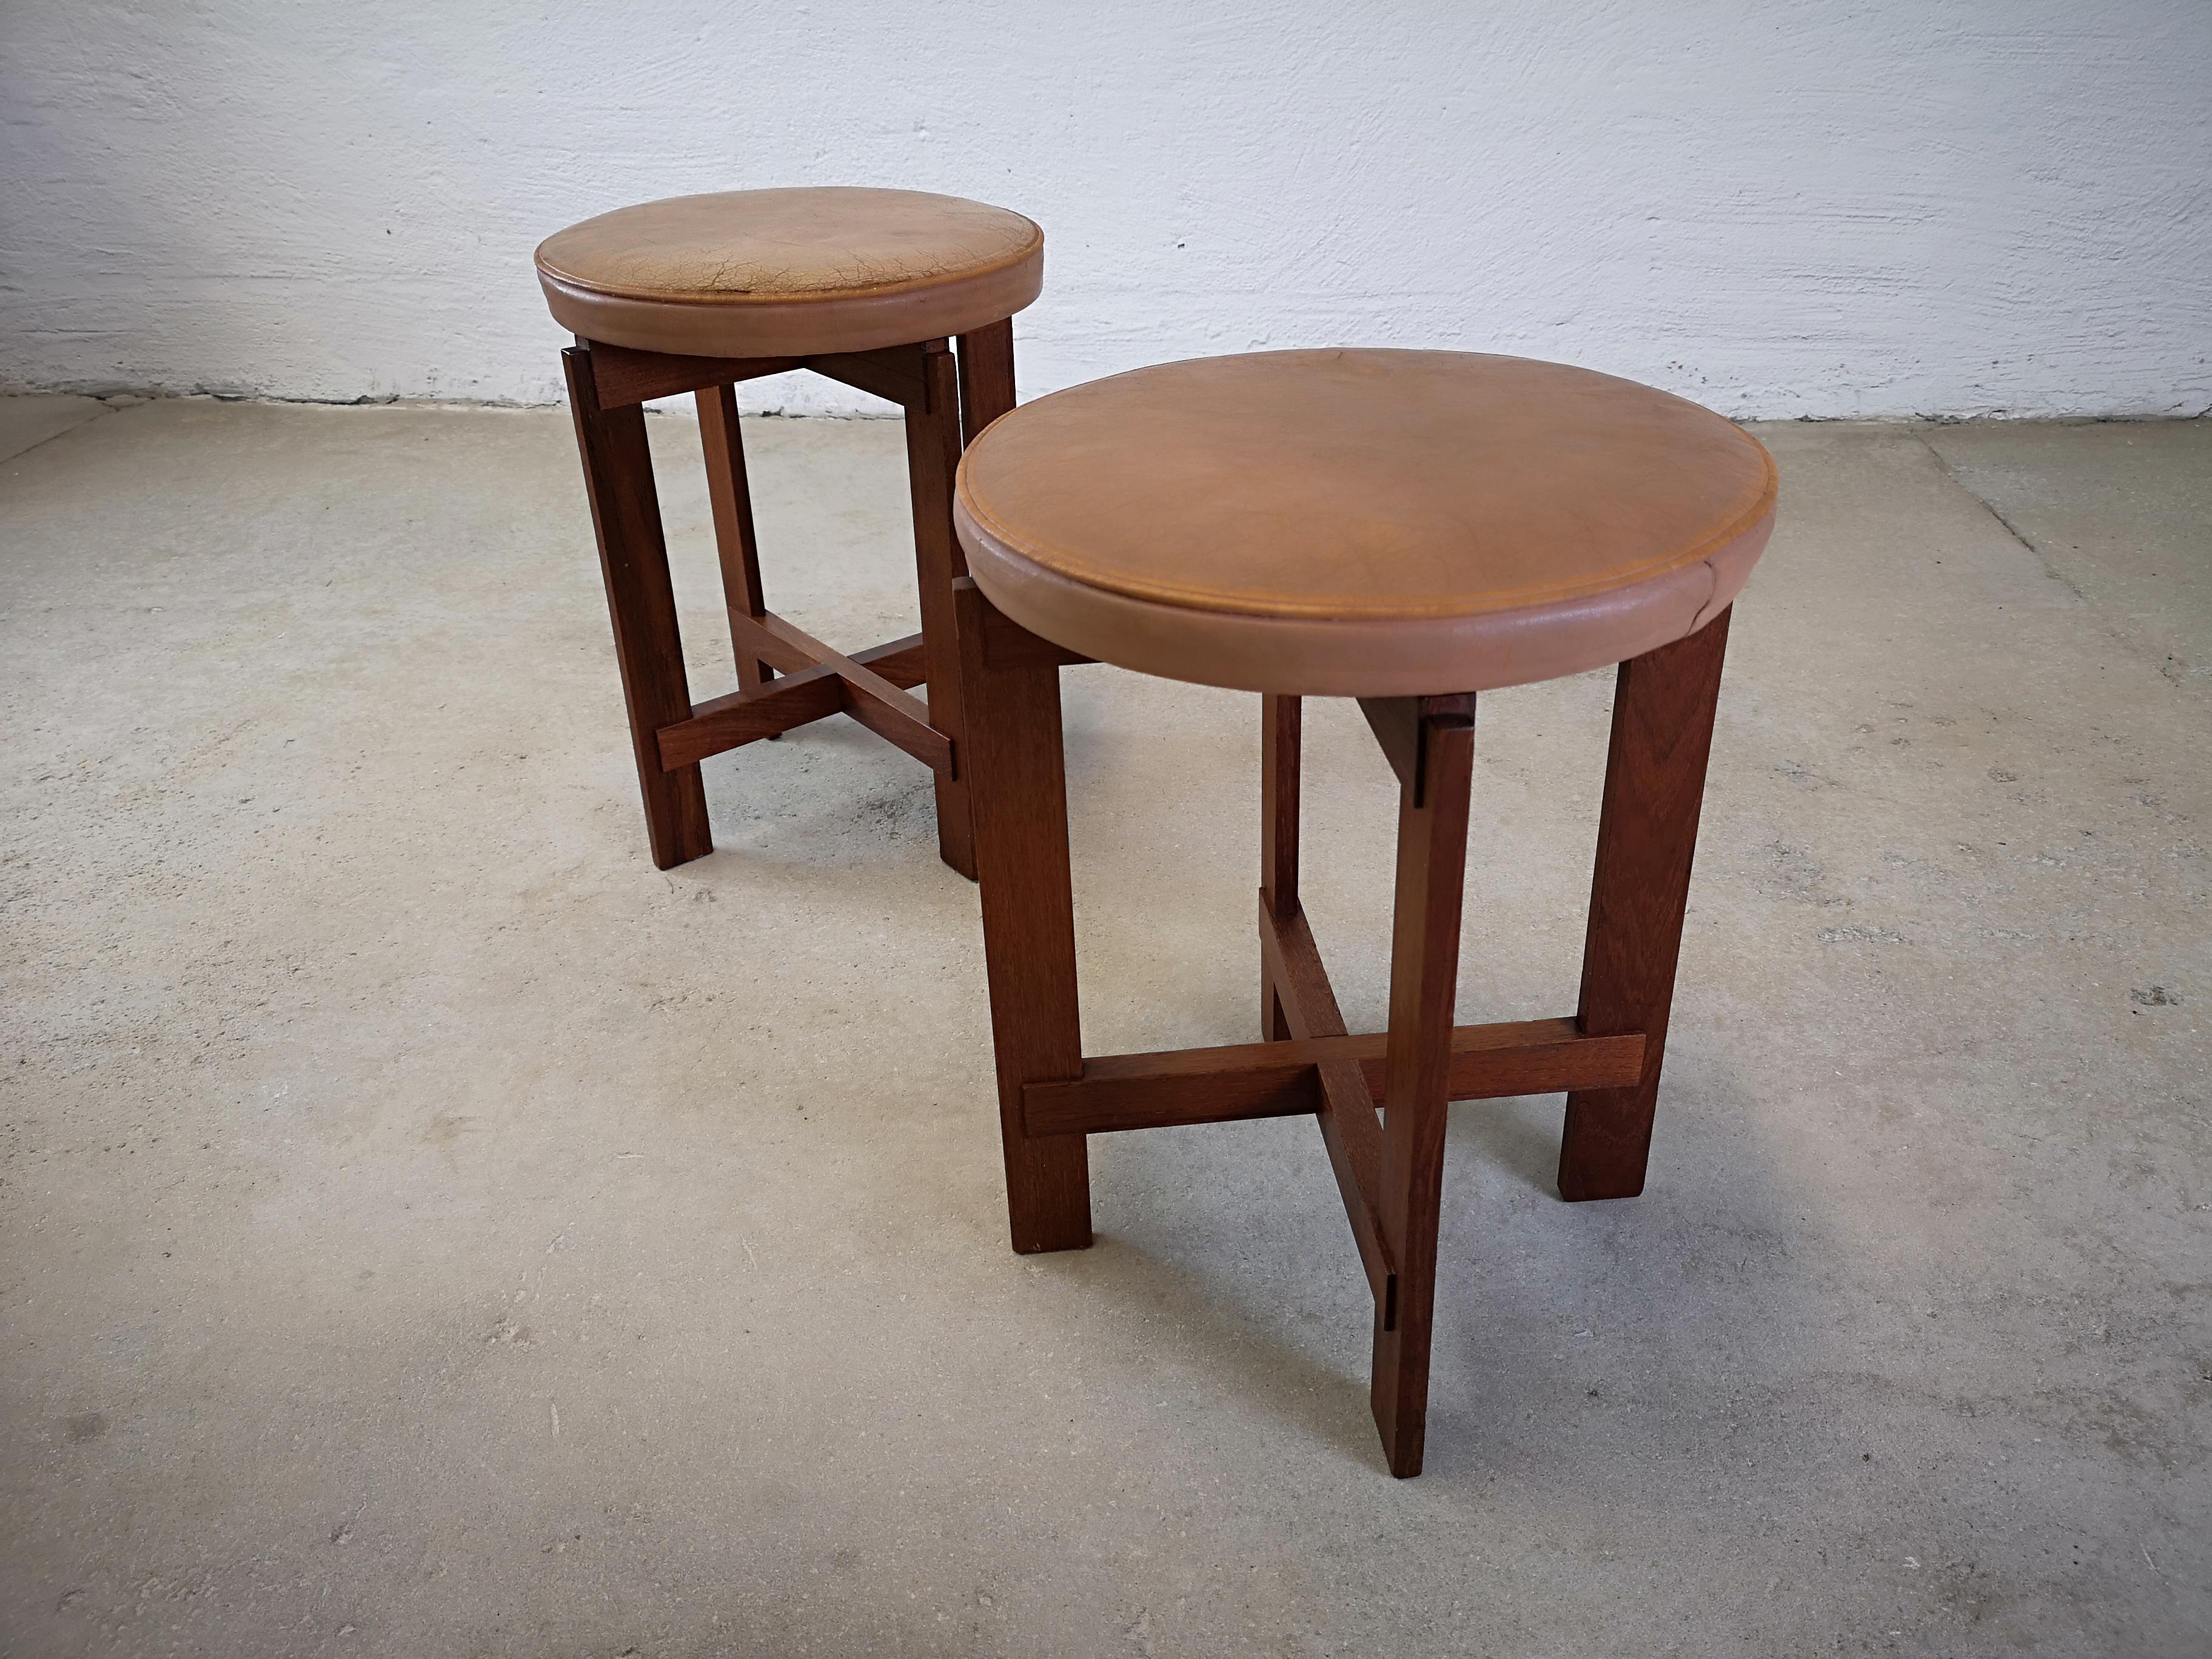 Swedish Stools in Teak and Leather by Uno & Östen Kristiansson for Luxus, Sweden, 1950s